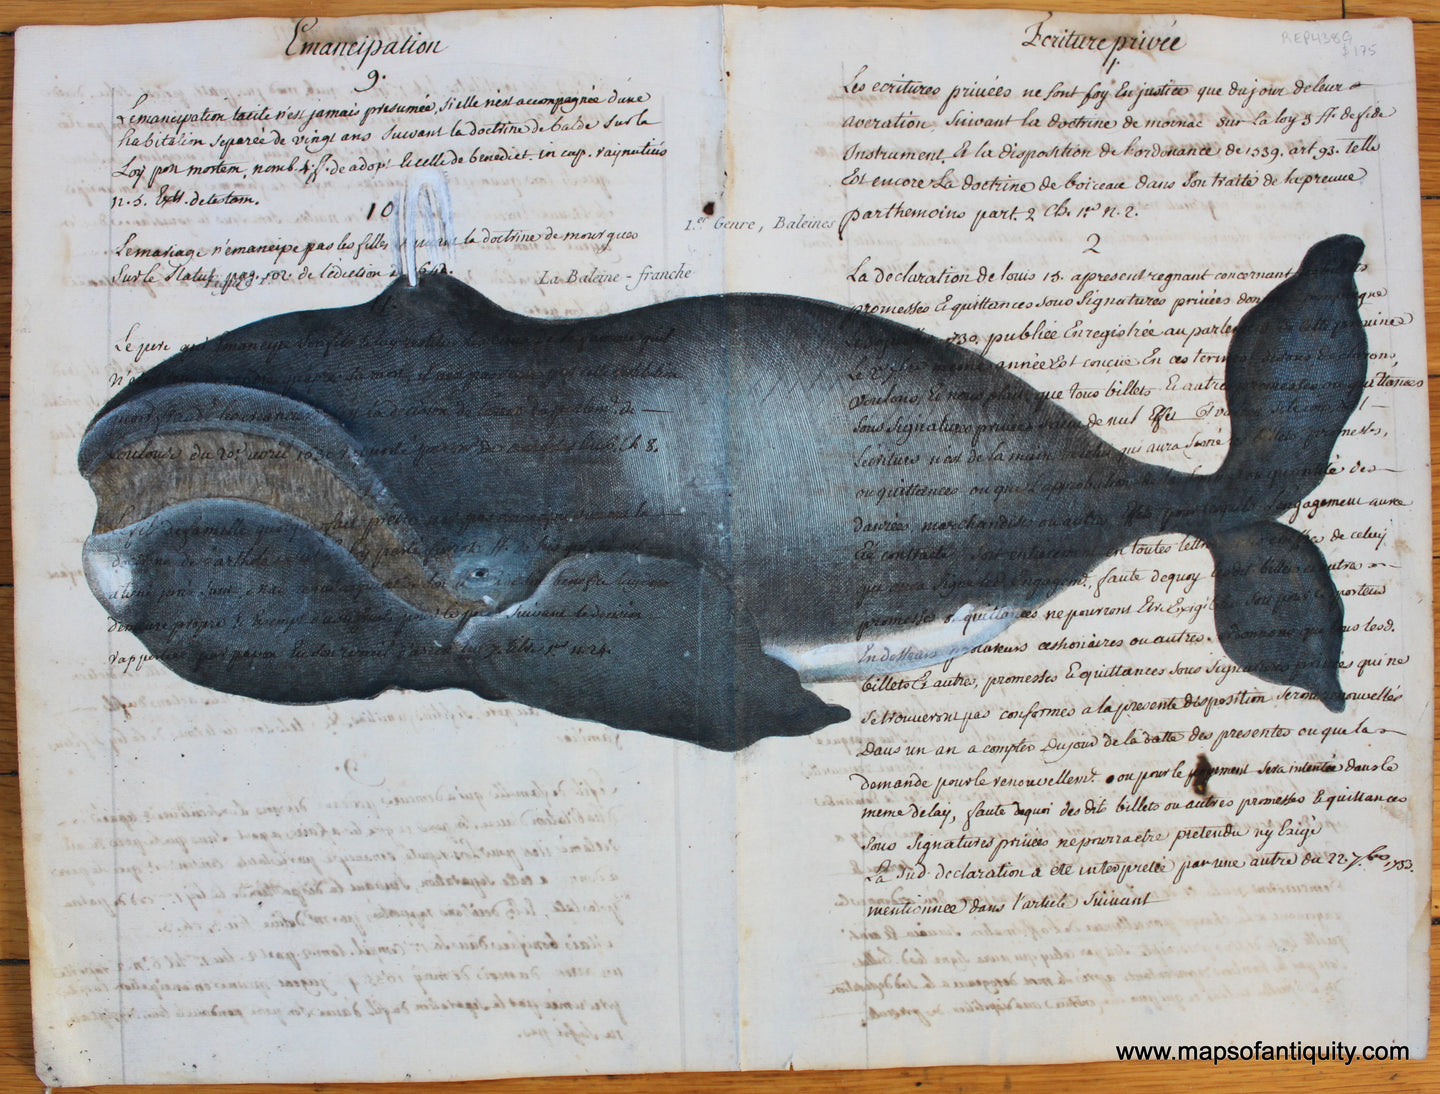 Reproduction-Antique-Print-Prints-Ledger-Notebook-Paper-Maps-Antiquity-Whales-Whaling-Whale-North-Atlantic-Right-Whale-Bowhead-Whale